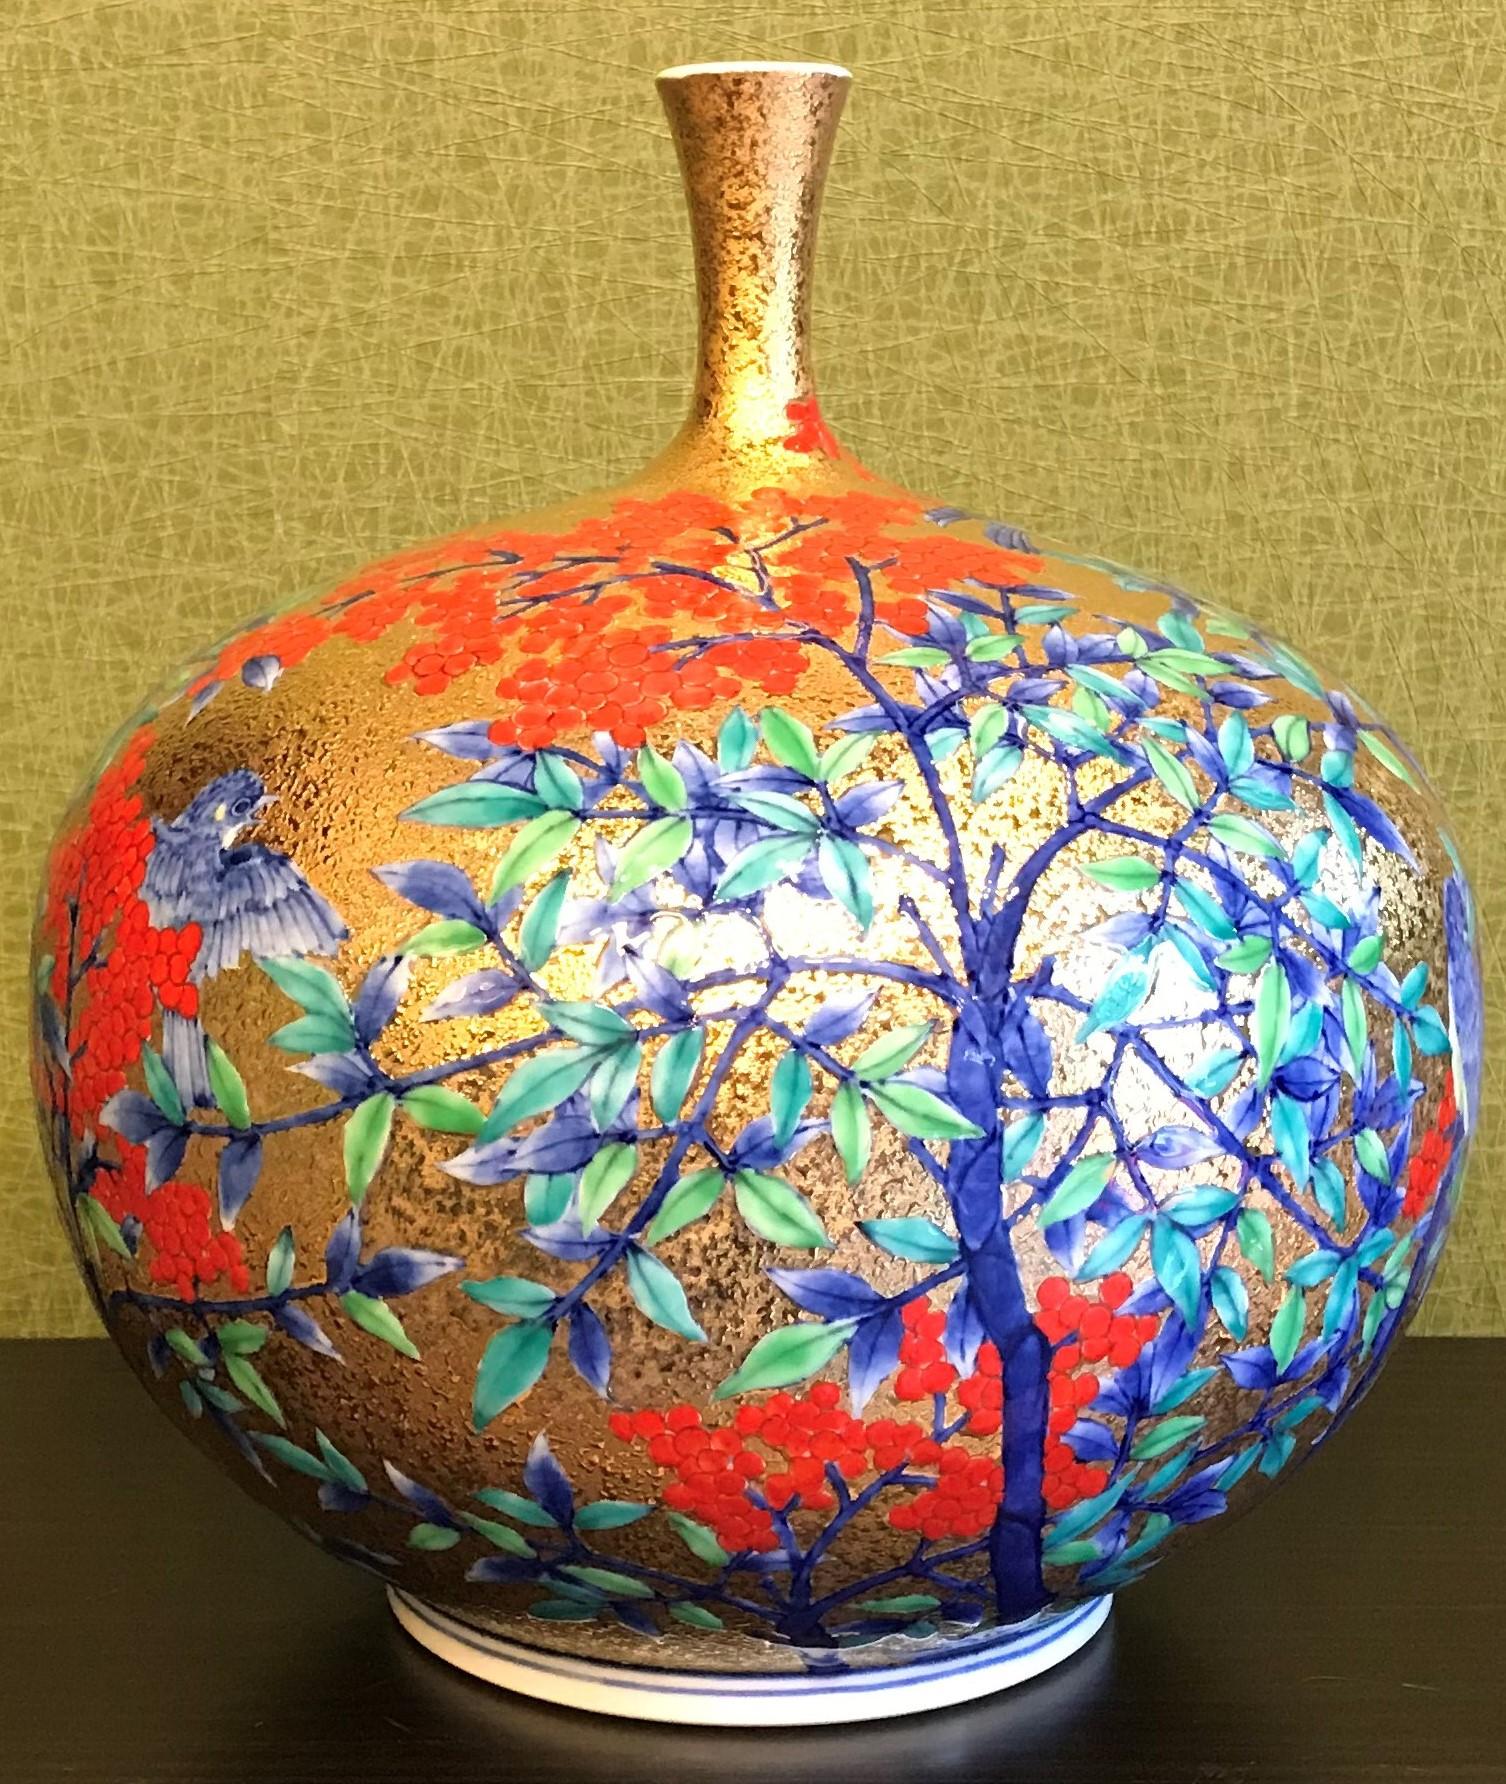 Exquisite contemporary gilded porcelain vase, intricately hand painted on an attractive gilded ovoid shaped body.
This piece is the work of highly respected award-winning master porcelain artist from the Imari-Arita region of Japan who is admired